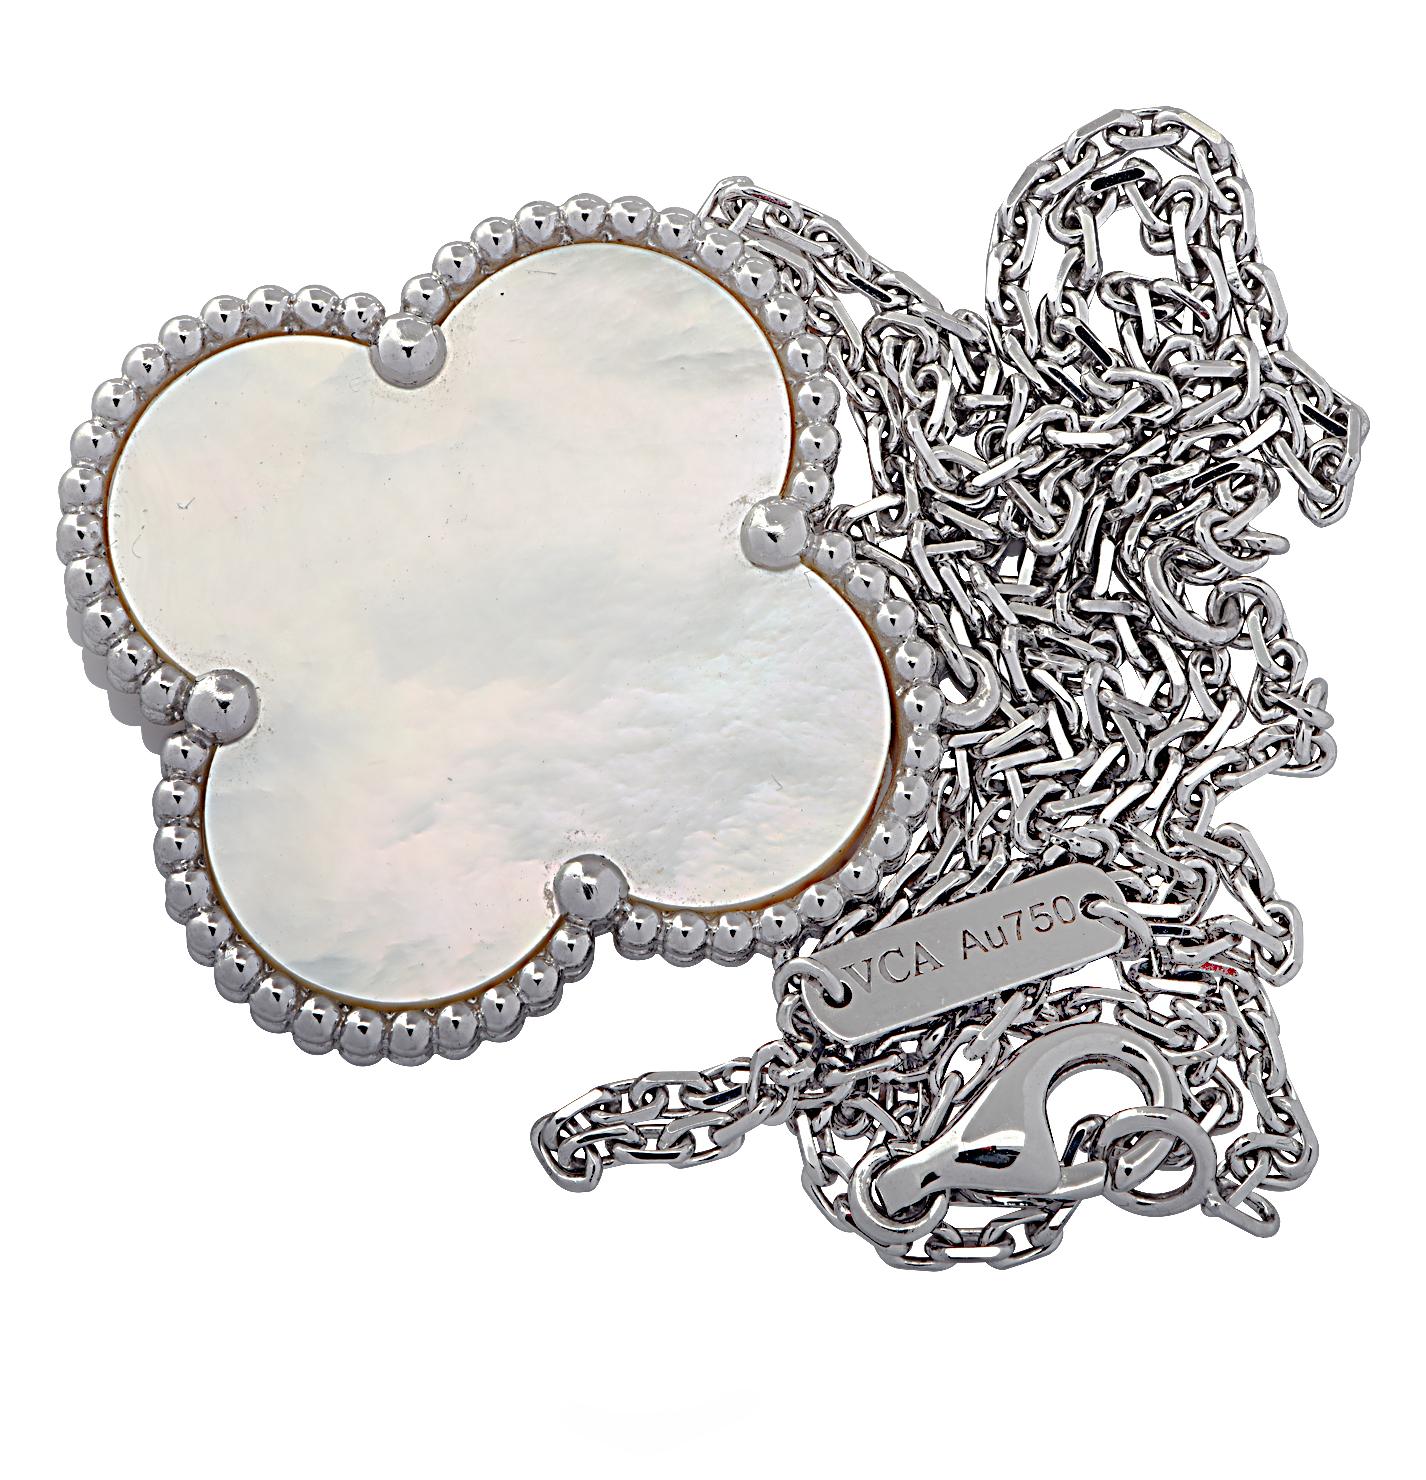 From the legendary house of Van Cleef & Arpels, this Magic Alhambra Mother of Pearl Pendantlarge model is finely crafted in 18 karat white gold, and features a single iconic extra-large mother of pearl clover measuring 1.04 inches in width and 1.04